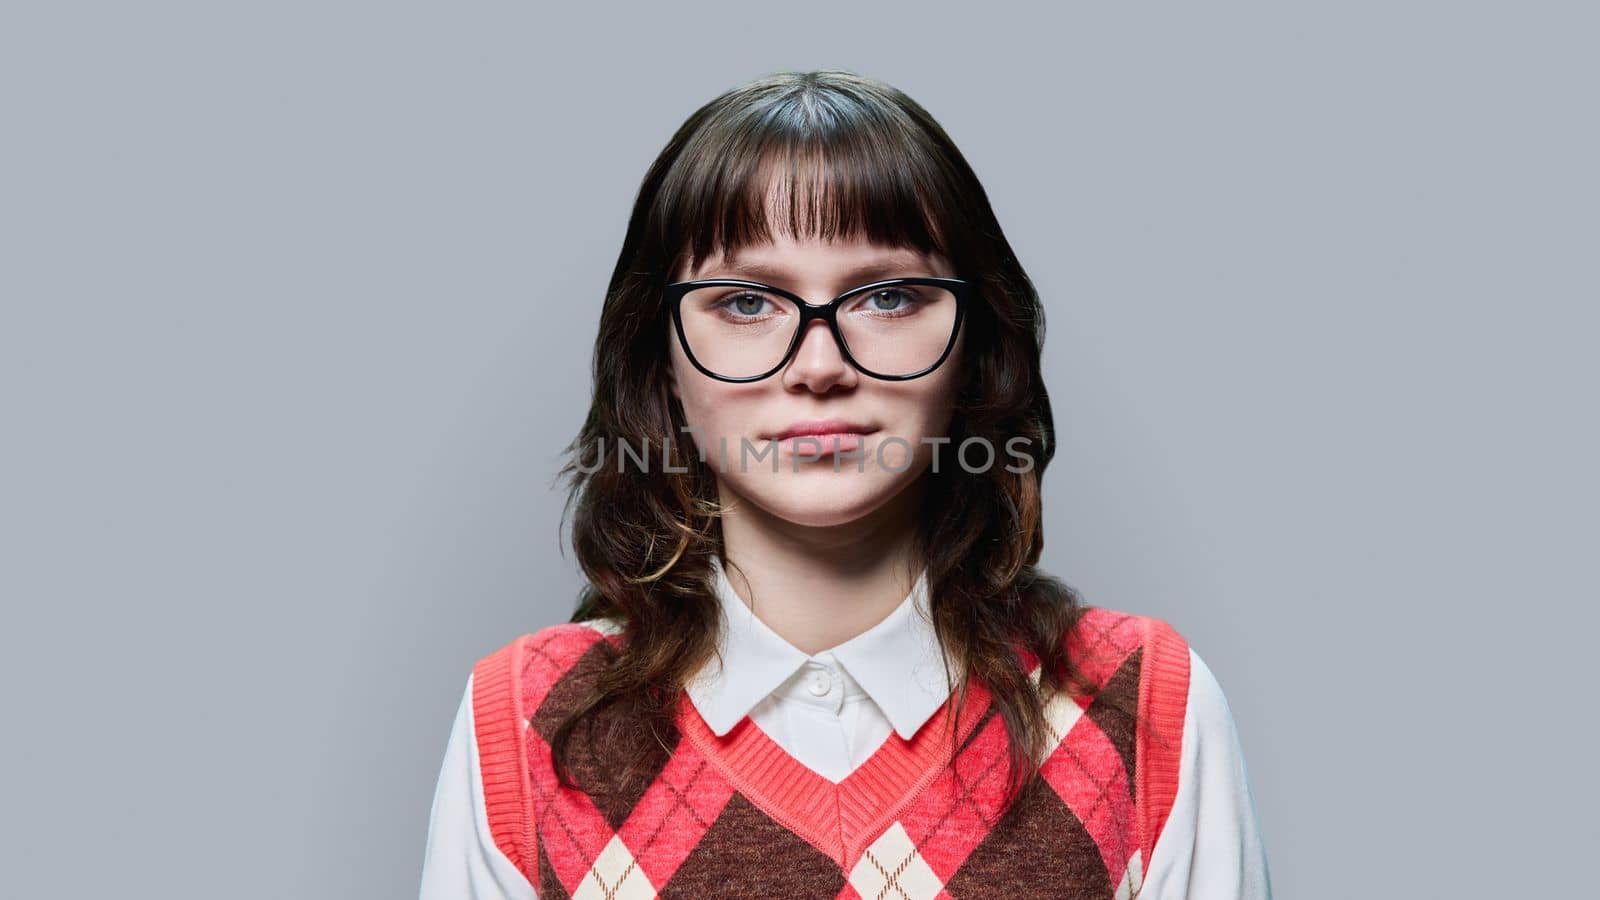 Portrait of confident young female student looking at camera on grey studio background. Serious calm teenage girl 18, 19 years old with glasses. Education, lifestyle, beauty emotion face youth concept